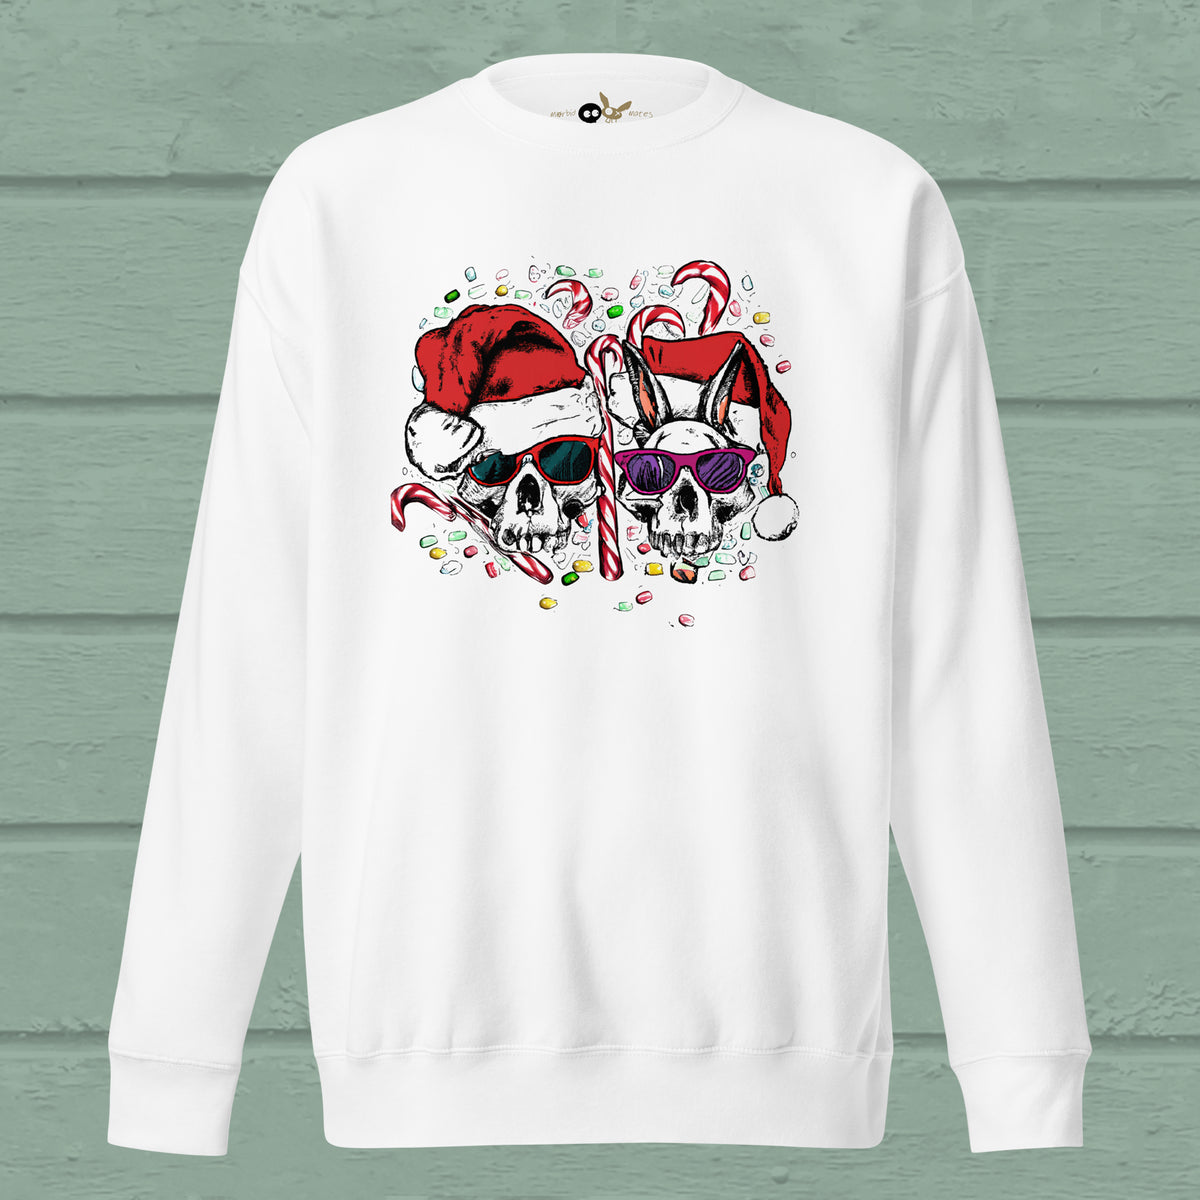 Candy Store Sweater